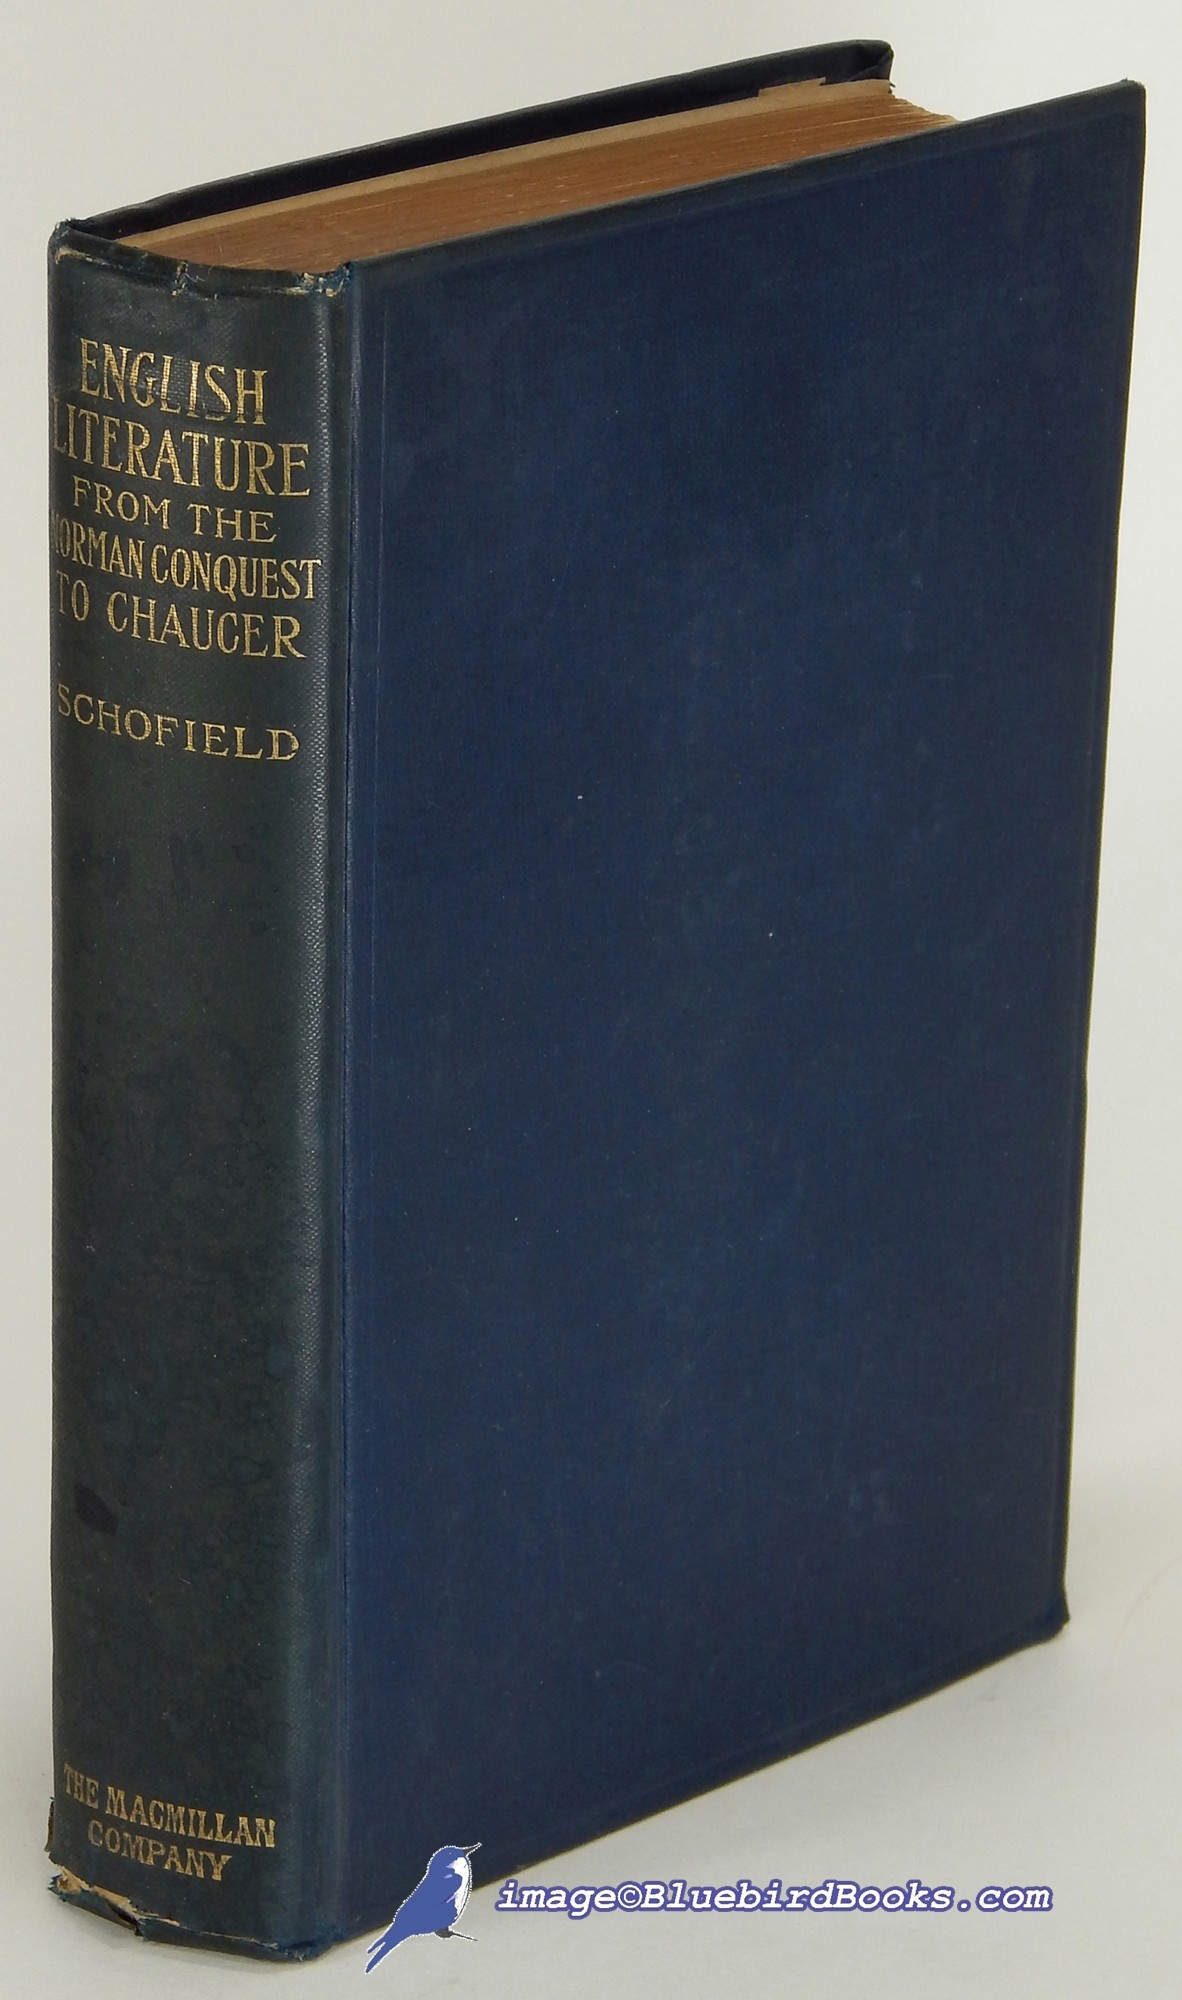 SCHOFIELD, WILLIAM HENRY - English Literature from the Norman Conquest to Chaucer